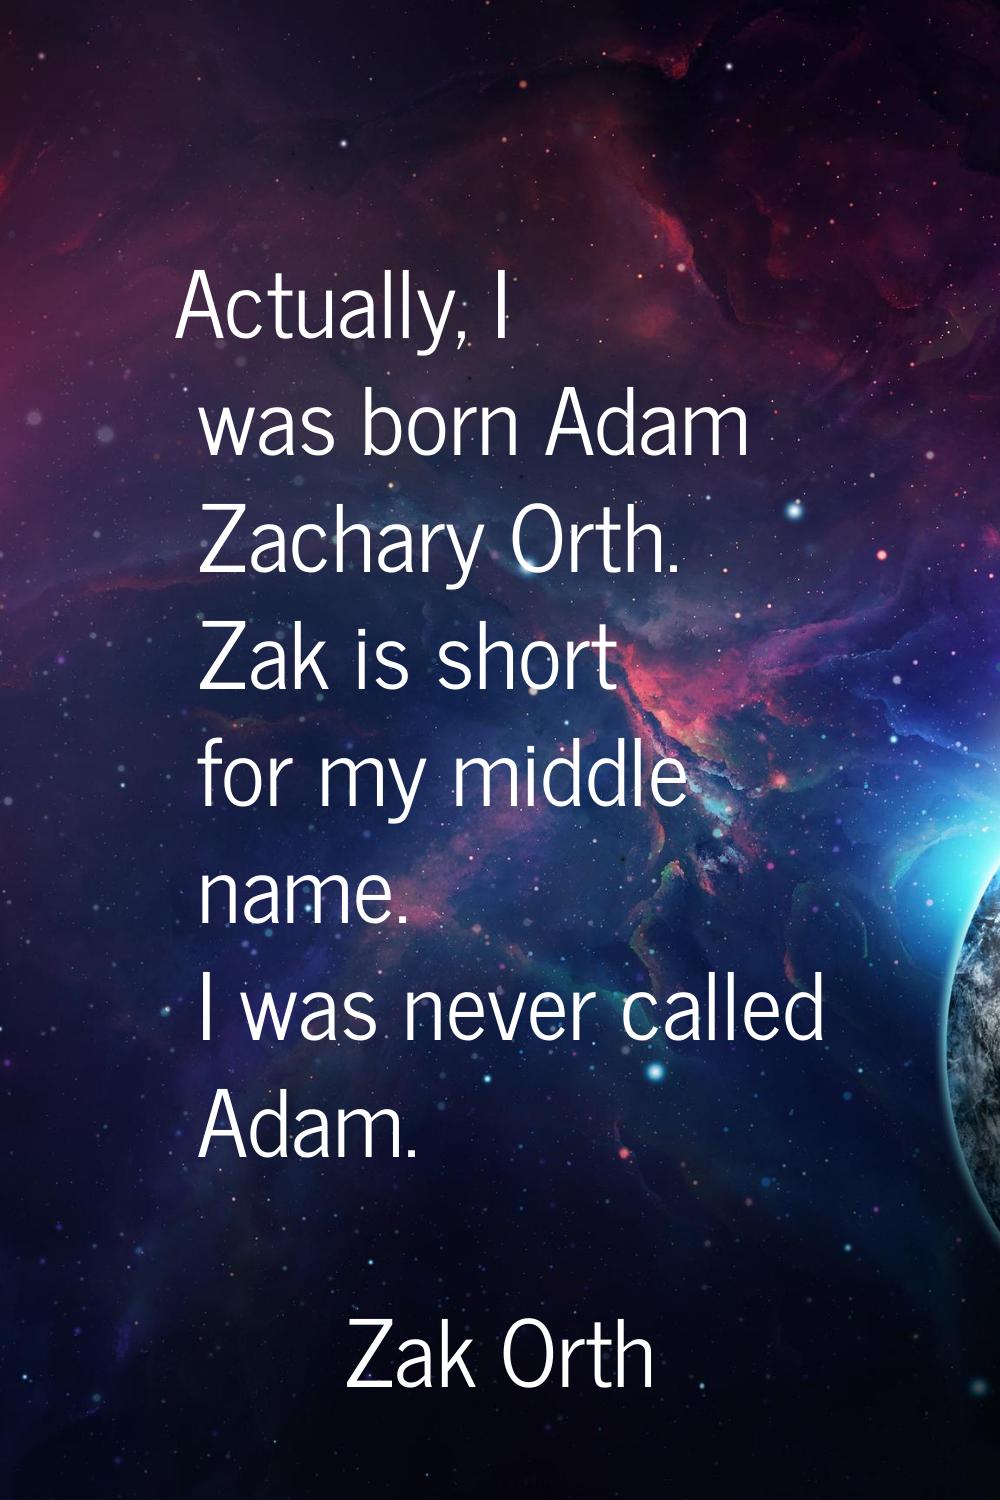 Actually, I was born Adam Zachary Orth. Zak is short for my middle name. I was never called Adam.